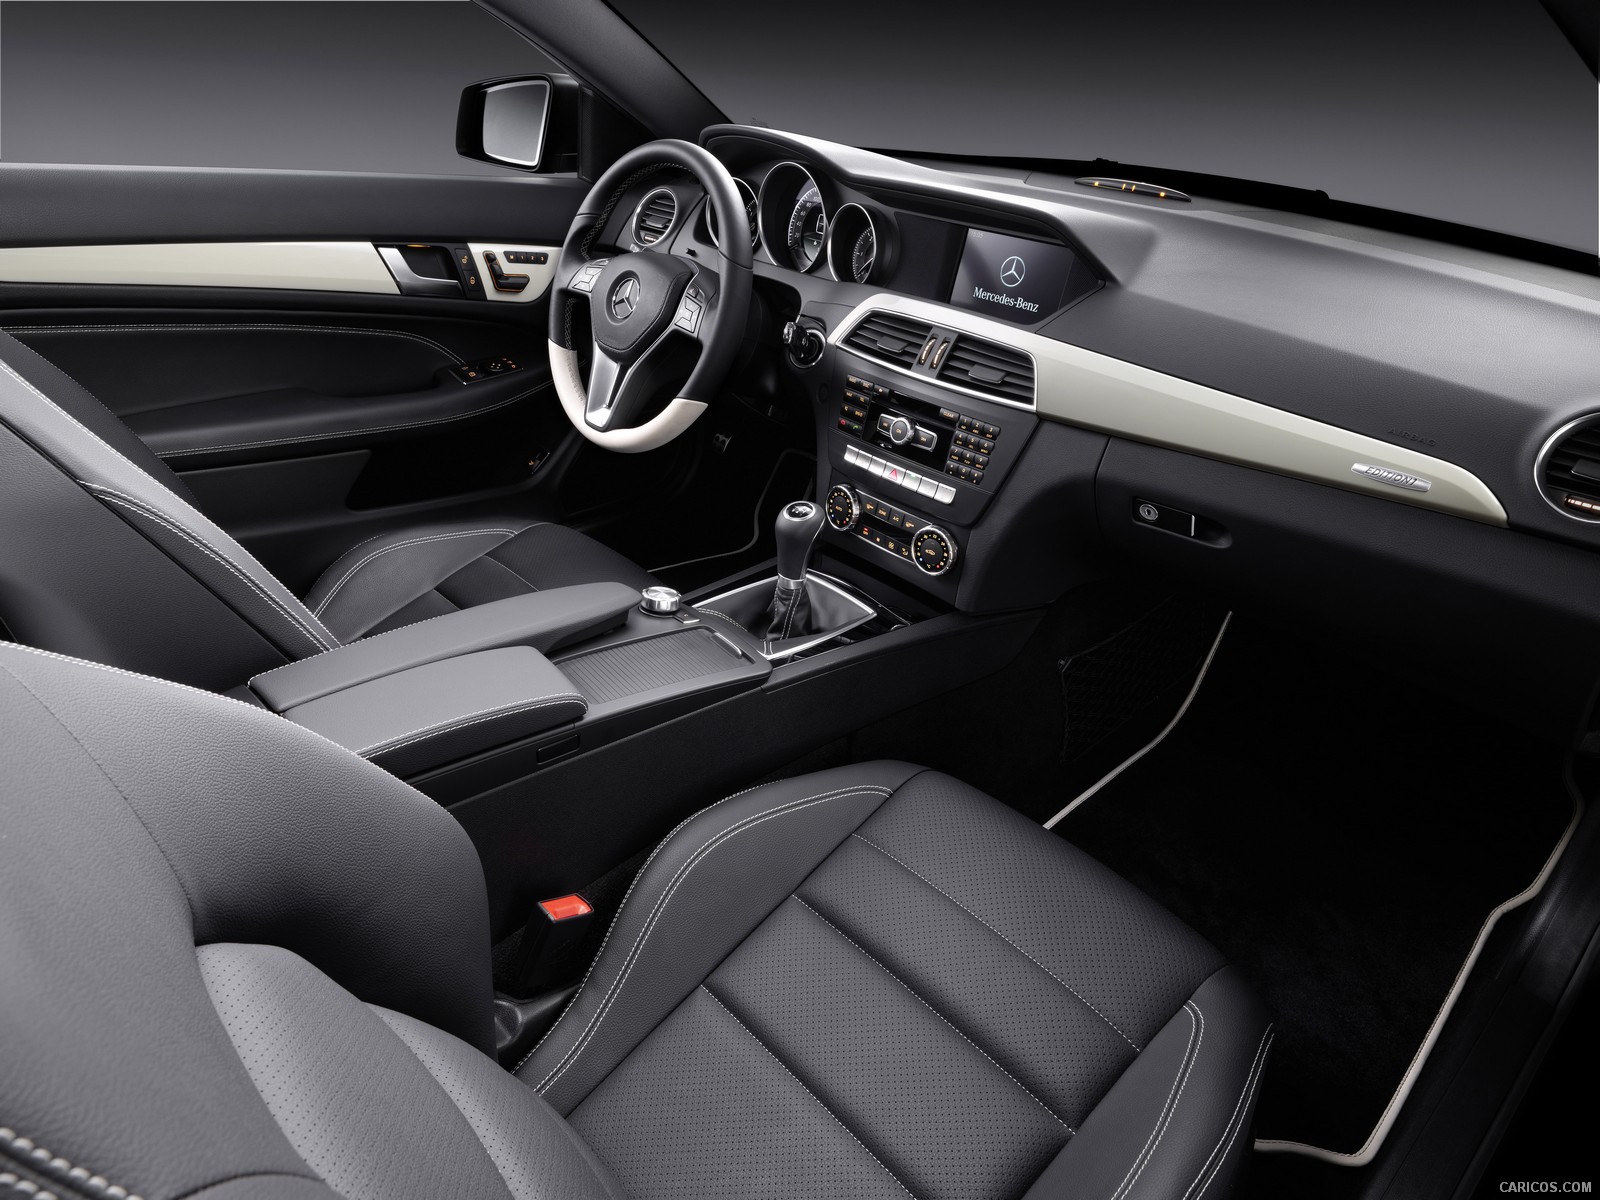 Mercedes-Benz C-Class Coupe (2012)  - Interior, #19 of 79